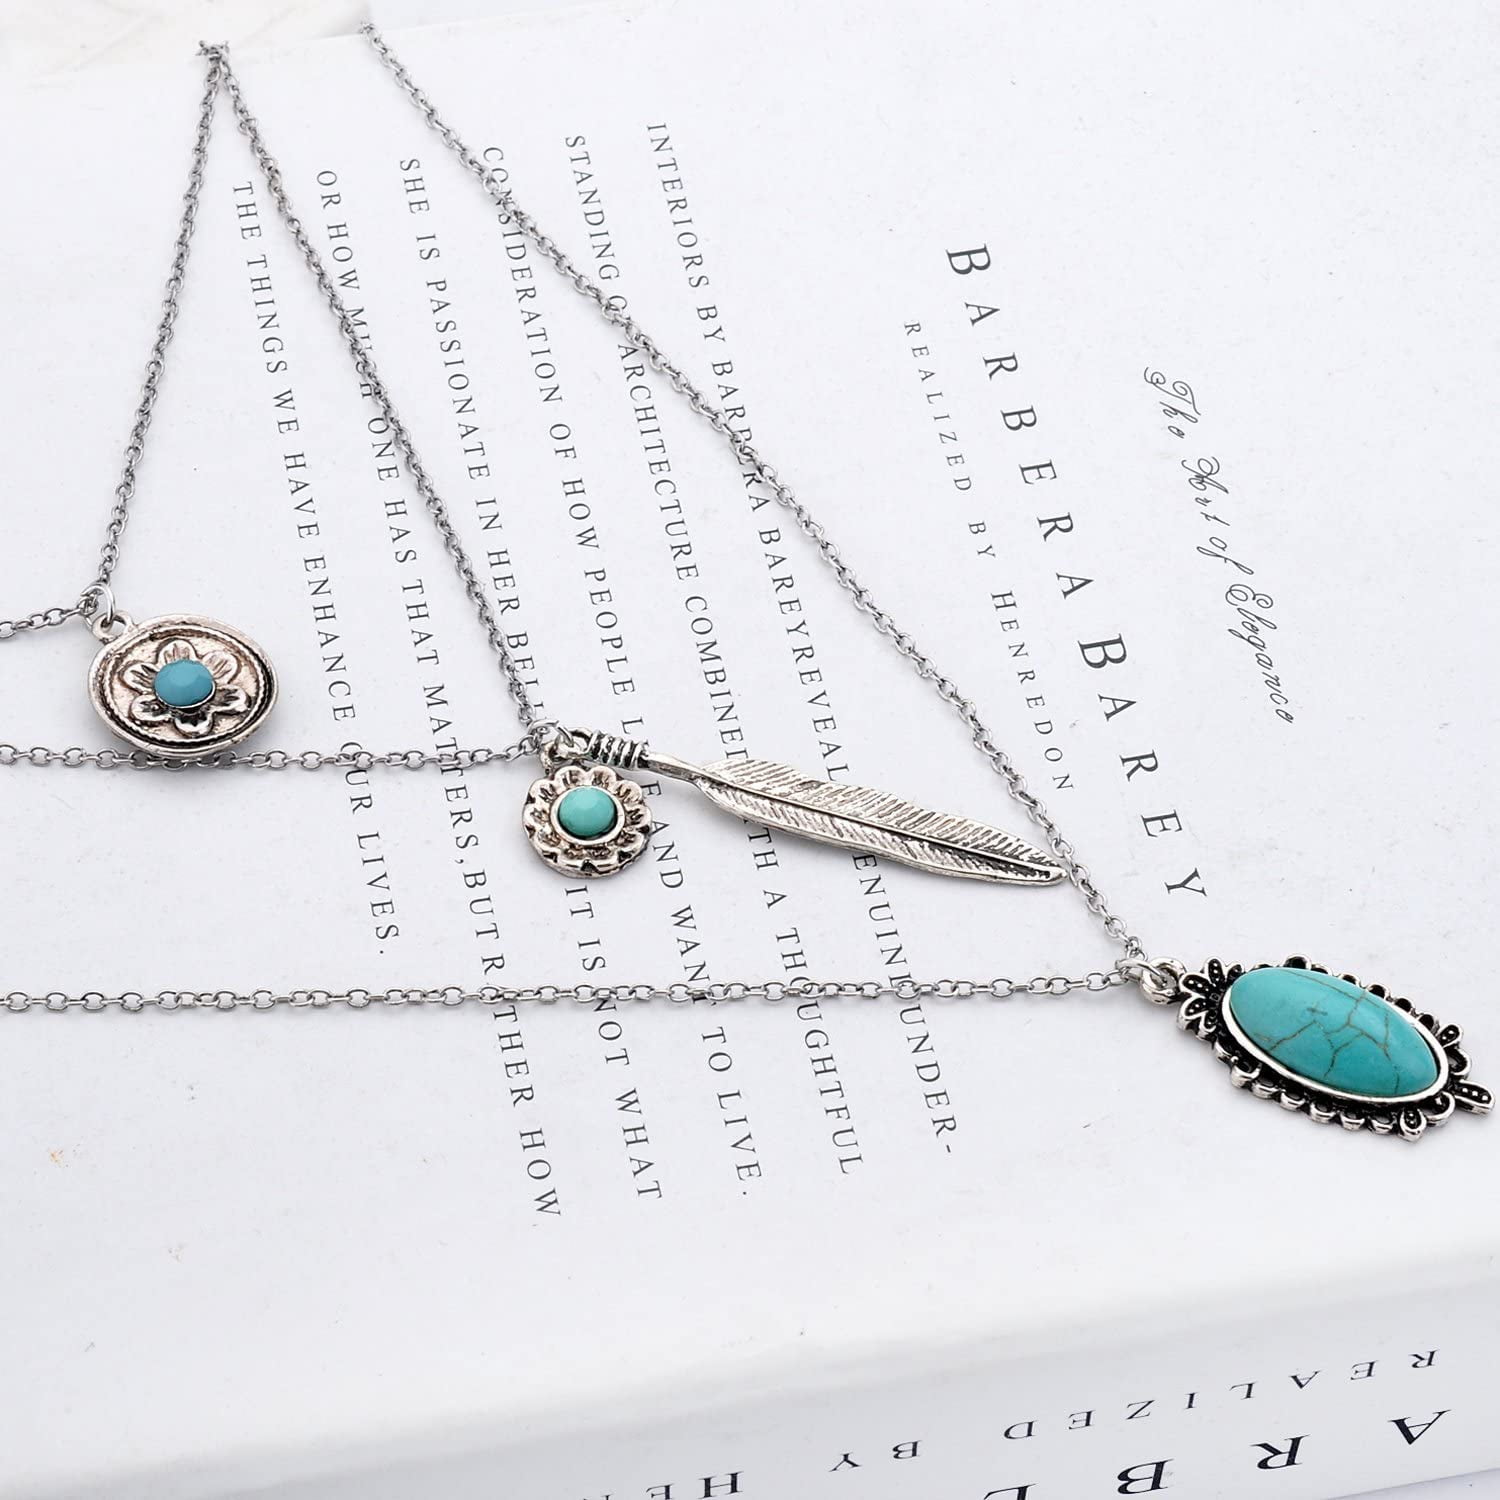 LUREME Vintage Multi Layered Chain Turquoise Stone Flower Metal Feather Pendant Necklace 01003373 